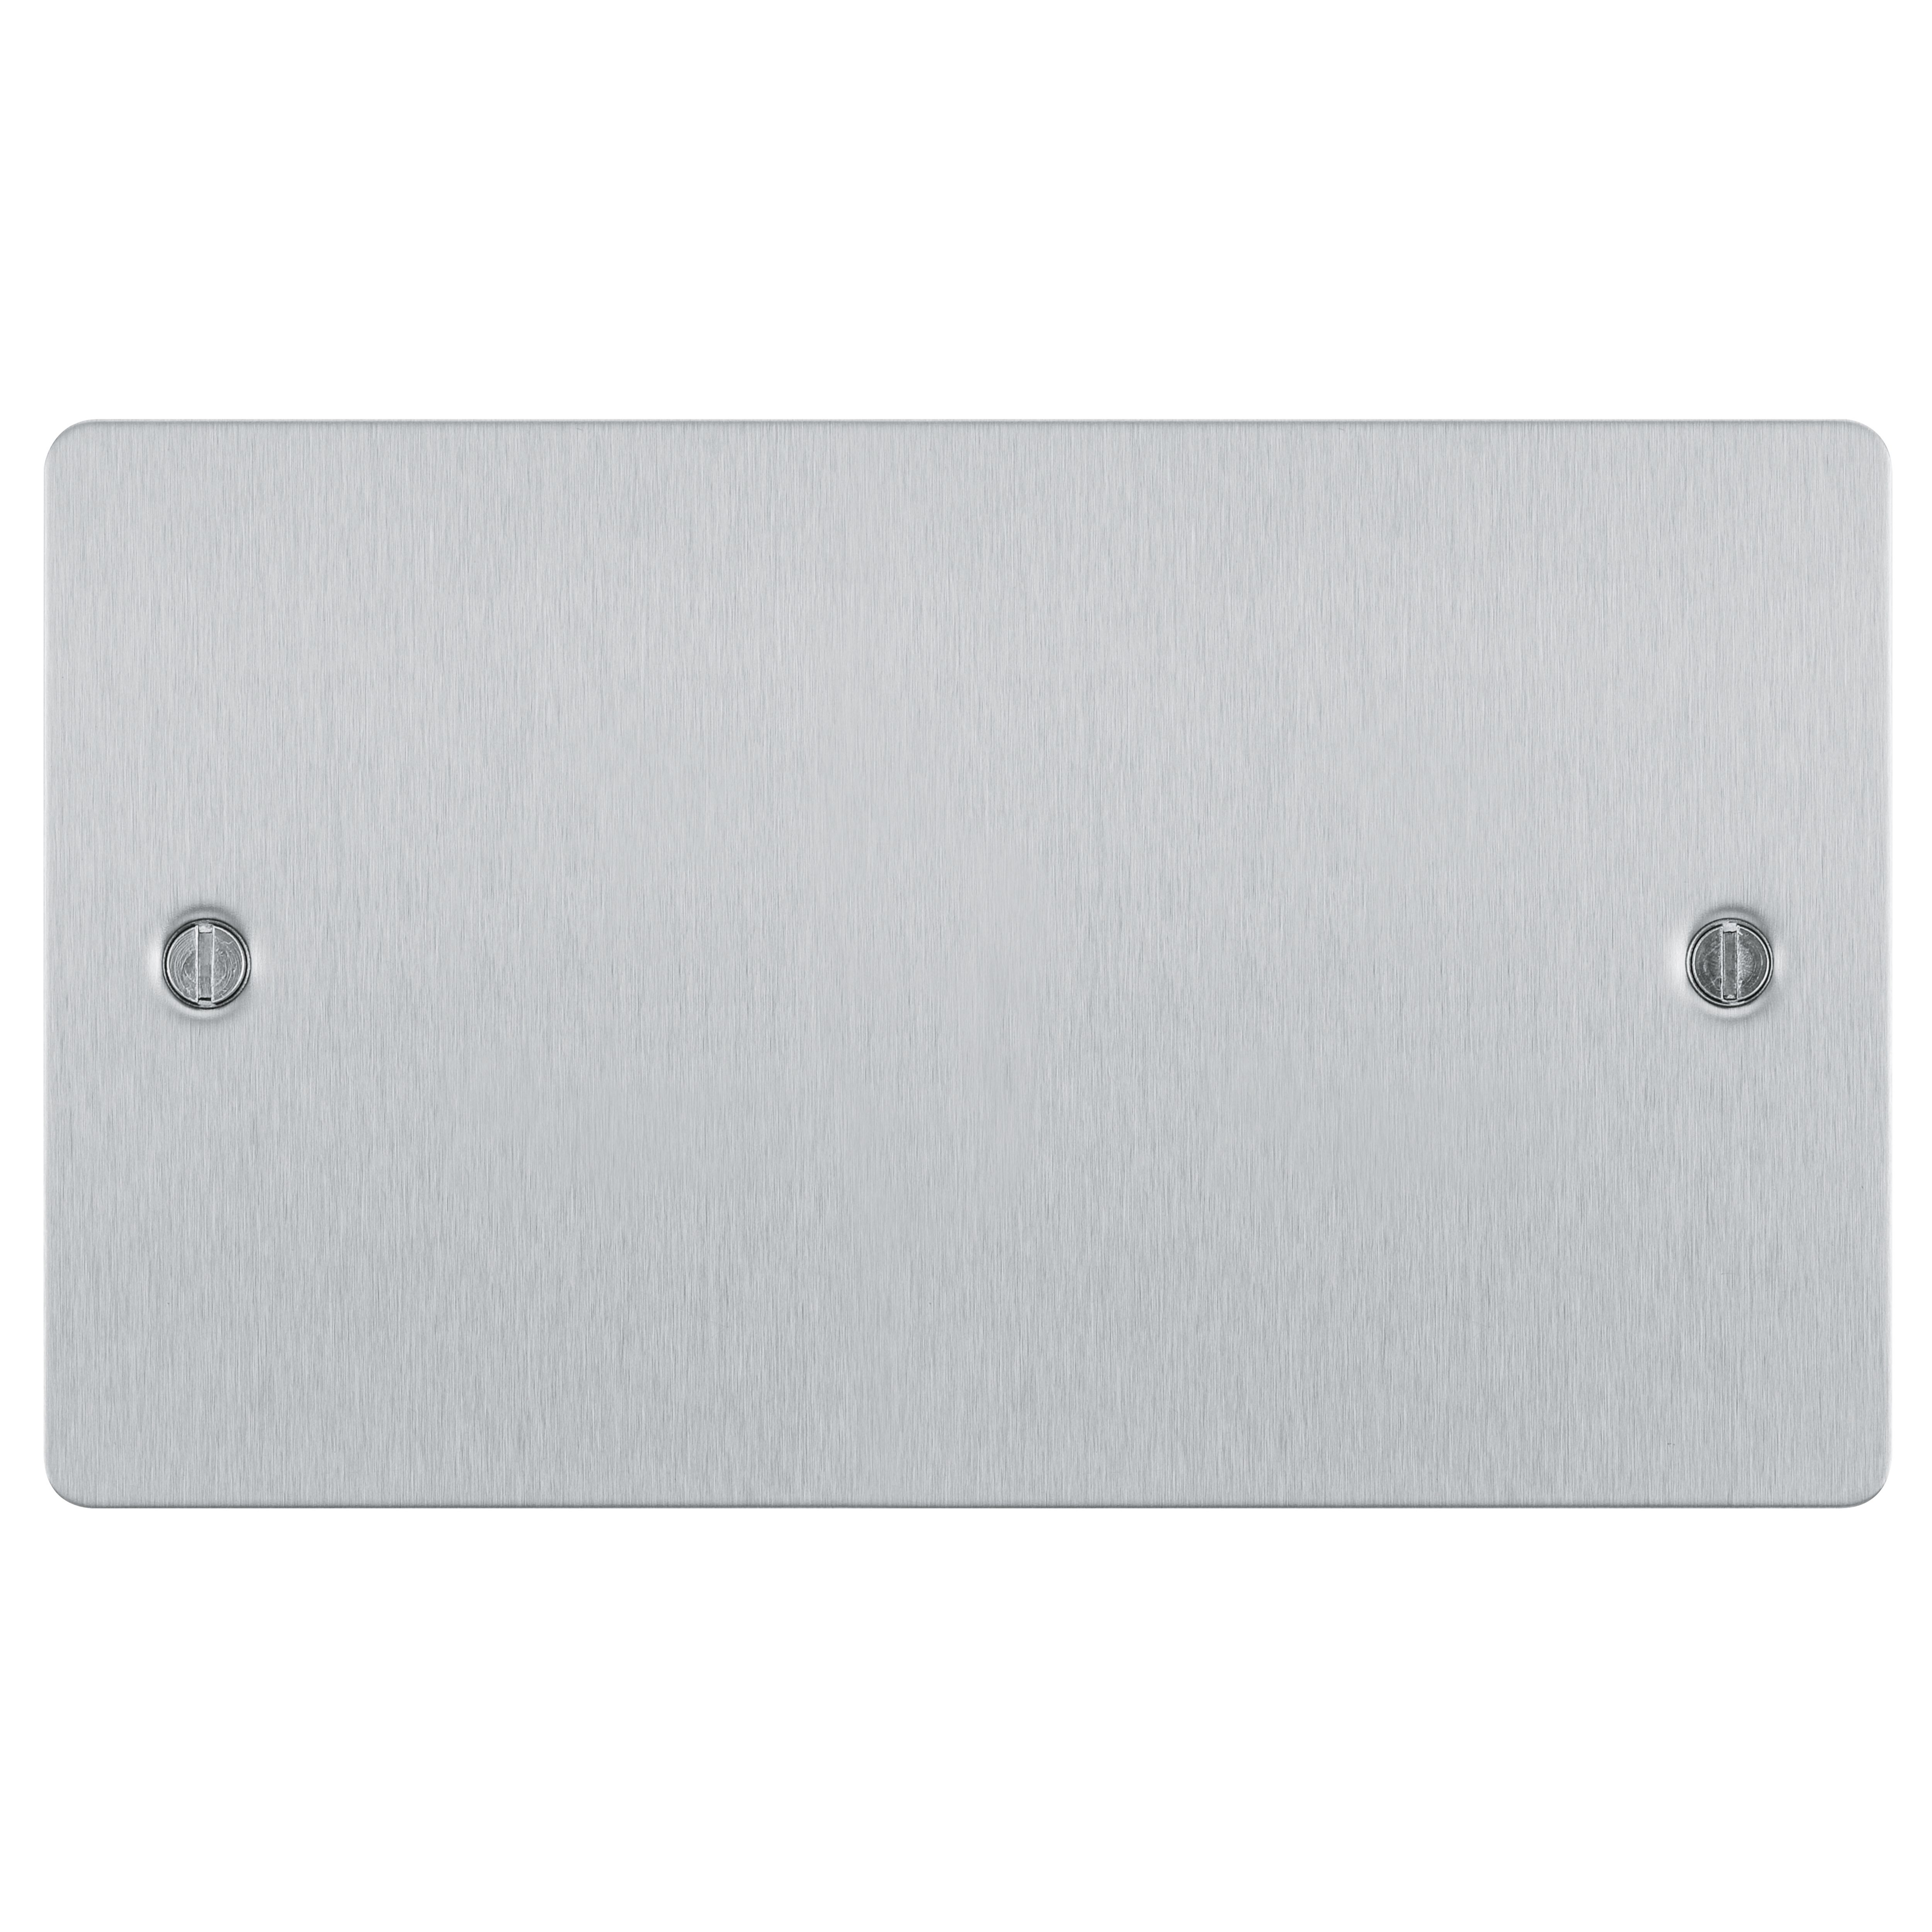 BG Brushed Steel 2 gang Double Blanking plate